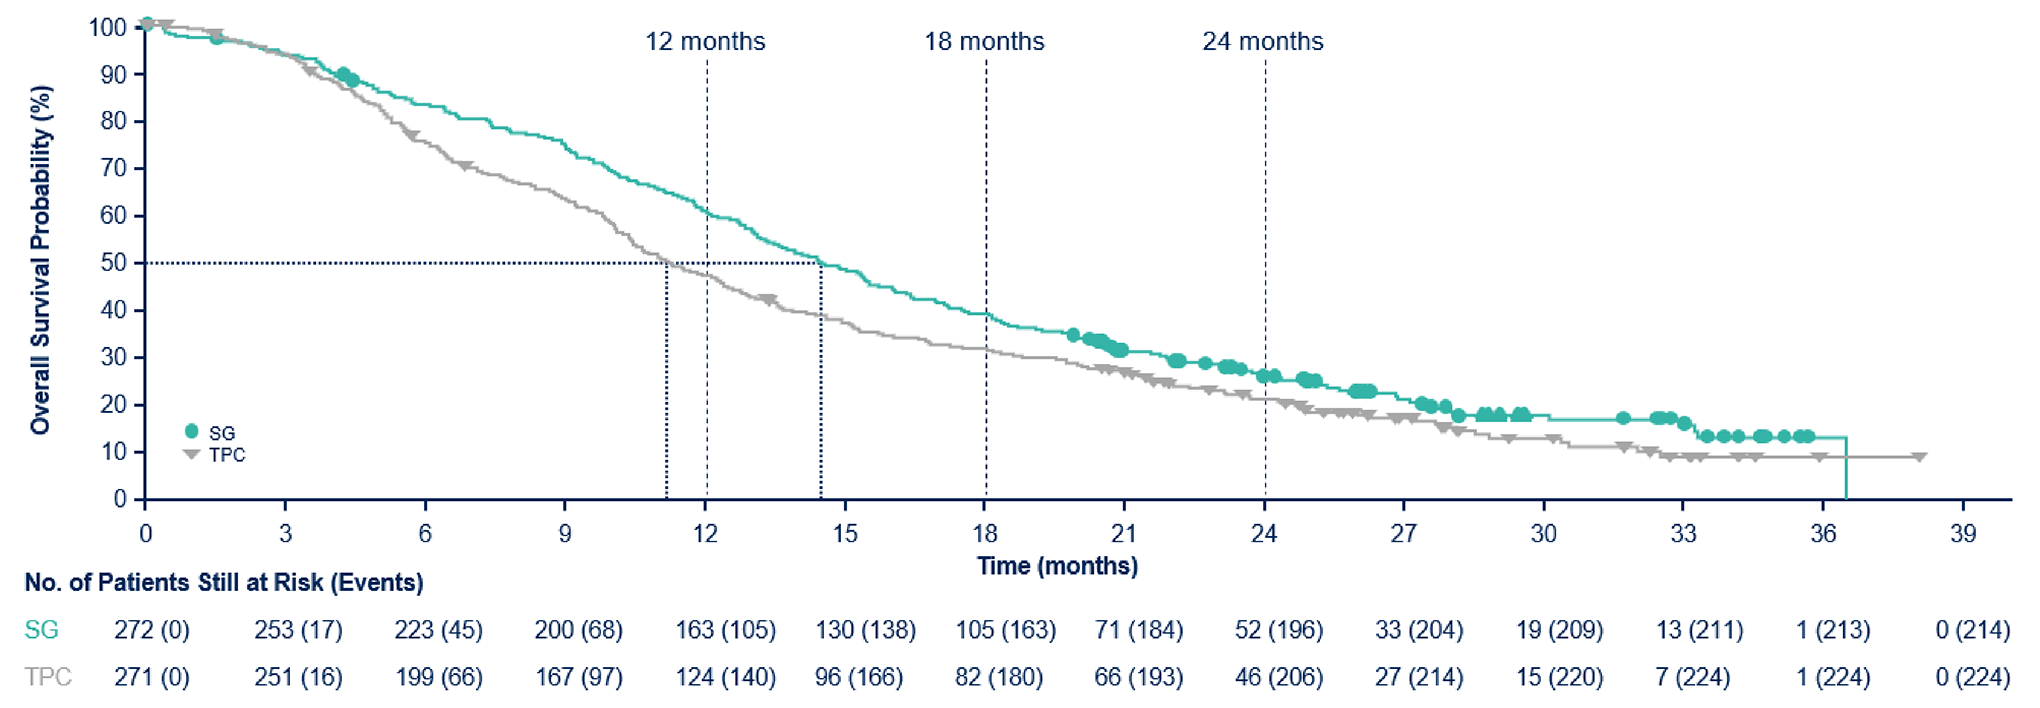 The sacituzumab govitecan and TPC curves separate approximately 1 month after randomization through the remainder of patient follow-up. At 24 months, the KM estimates were 25.6% (95% CI, 20.4 to 31.1) in the sacituzumab govitecan group and 21.1% (95% CI, 16.3 to 26.3) in the TPC group.